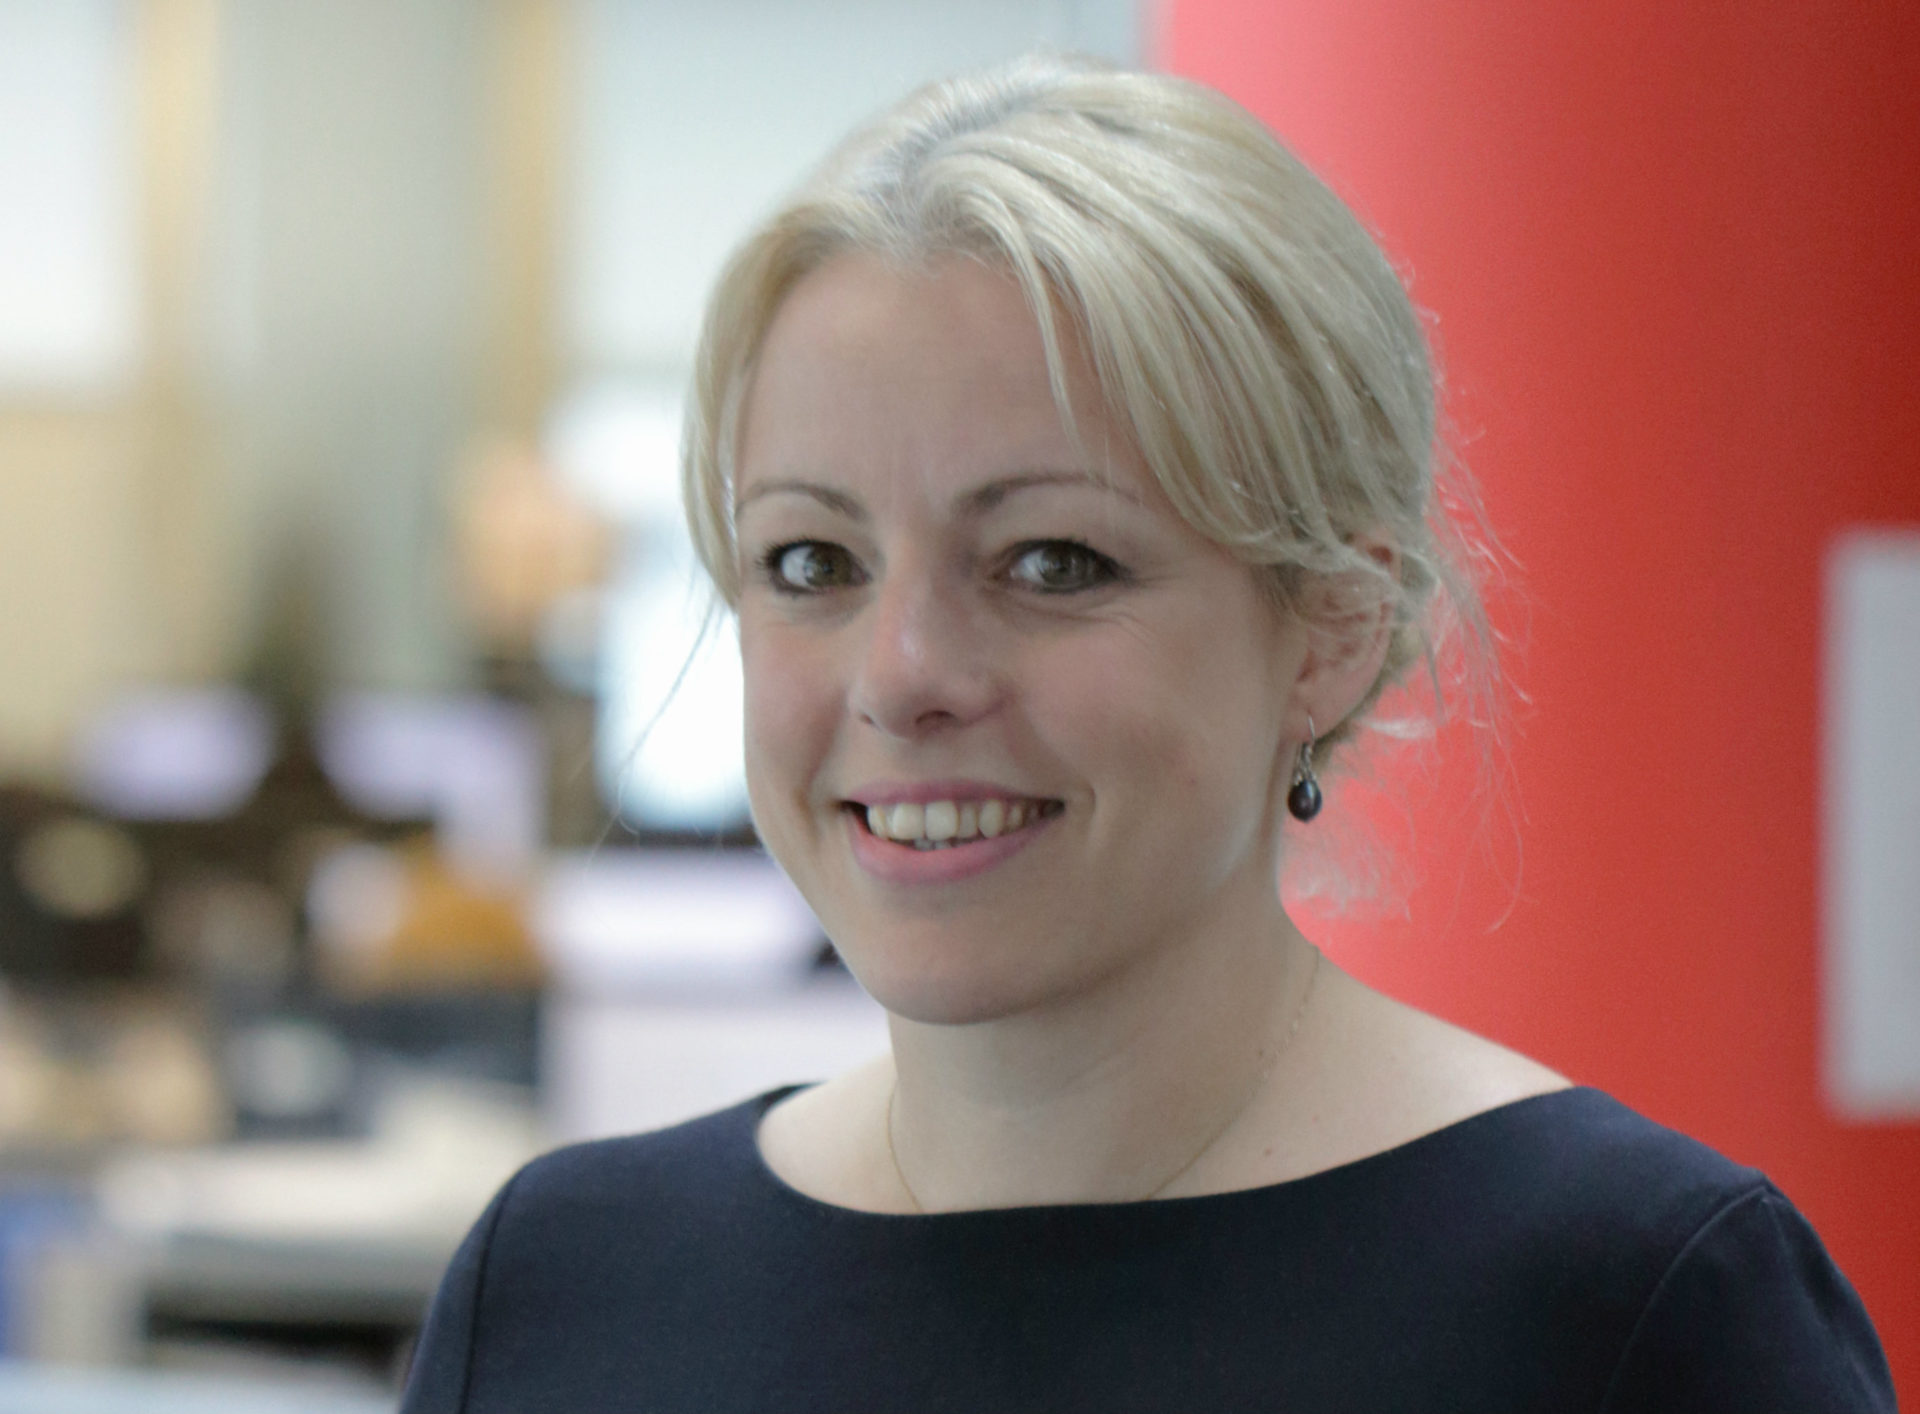 GW4 ALLIANCE APPOINTS NEW DIRECTOR